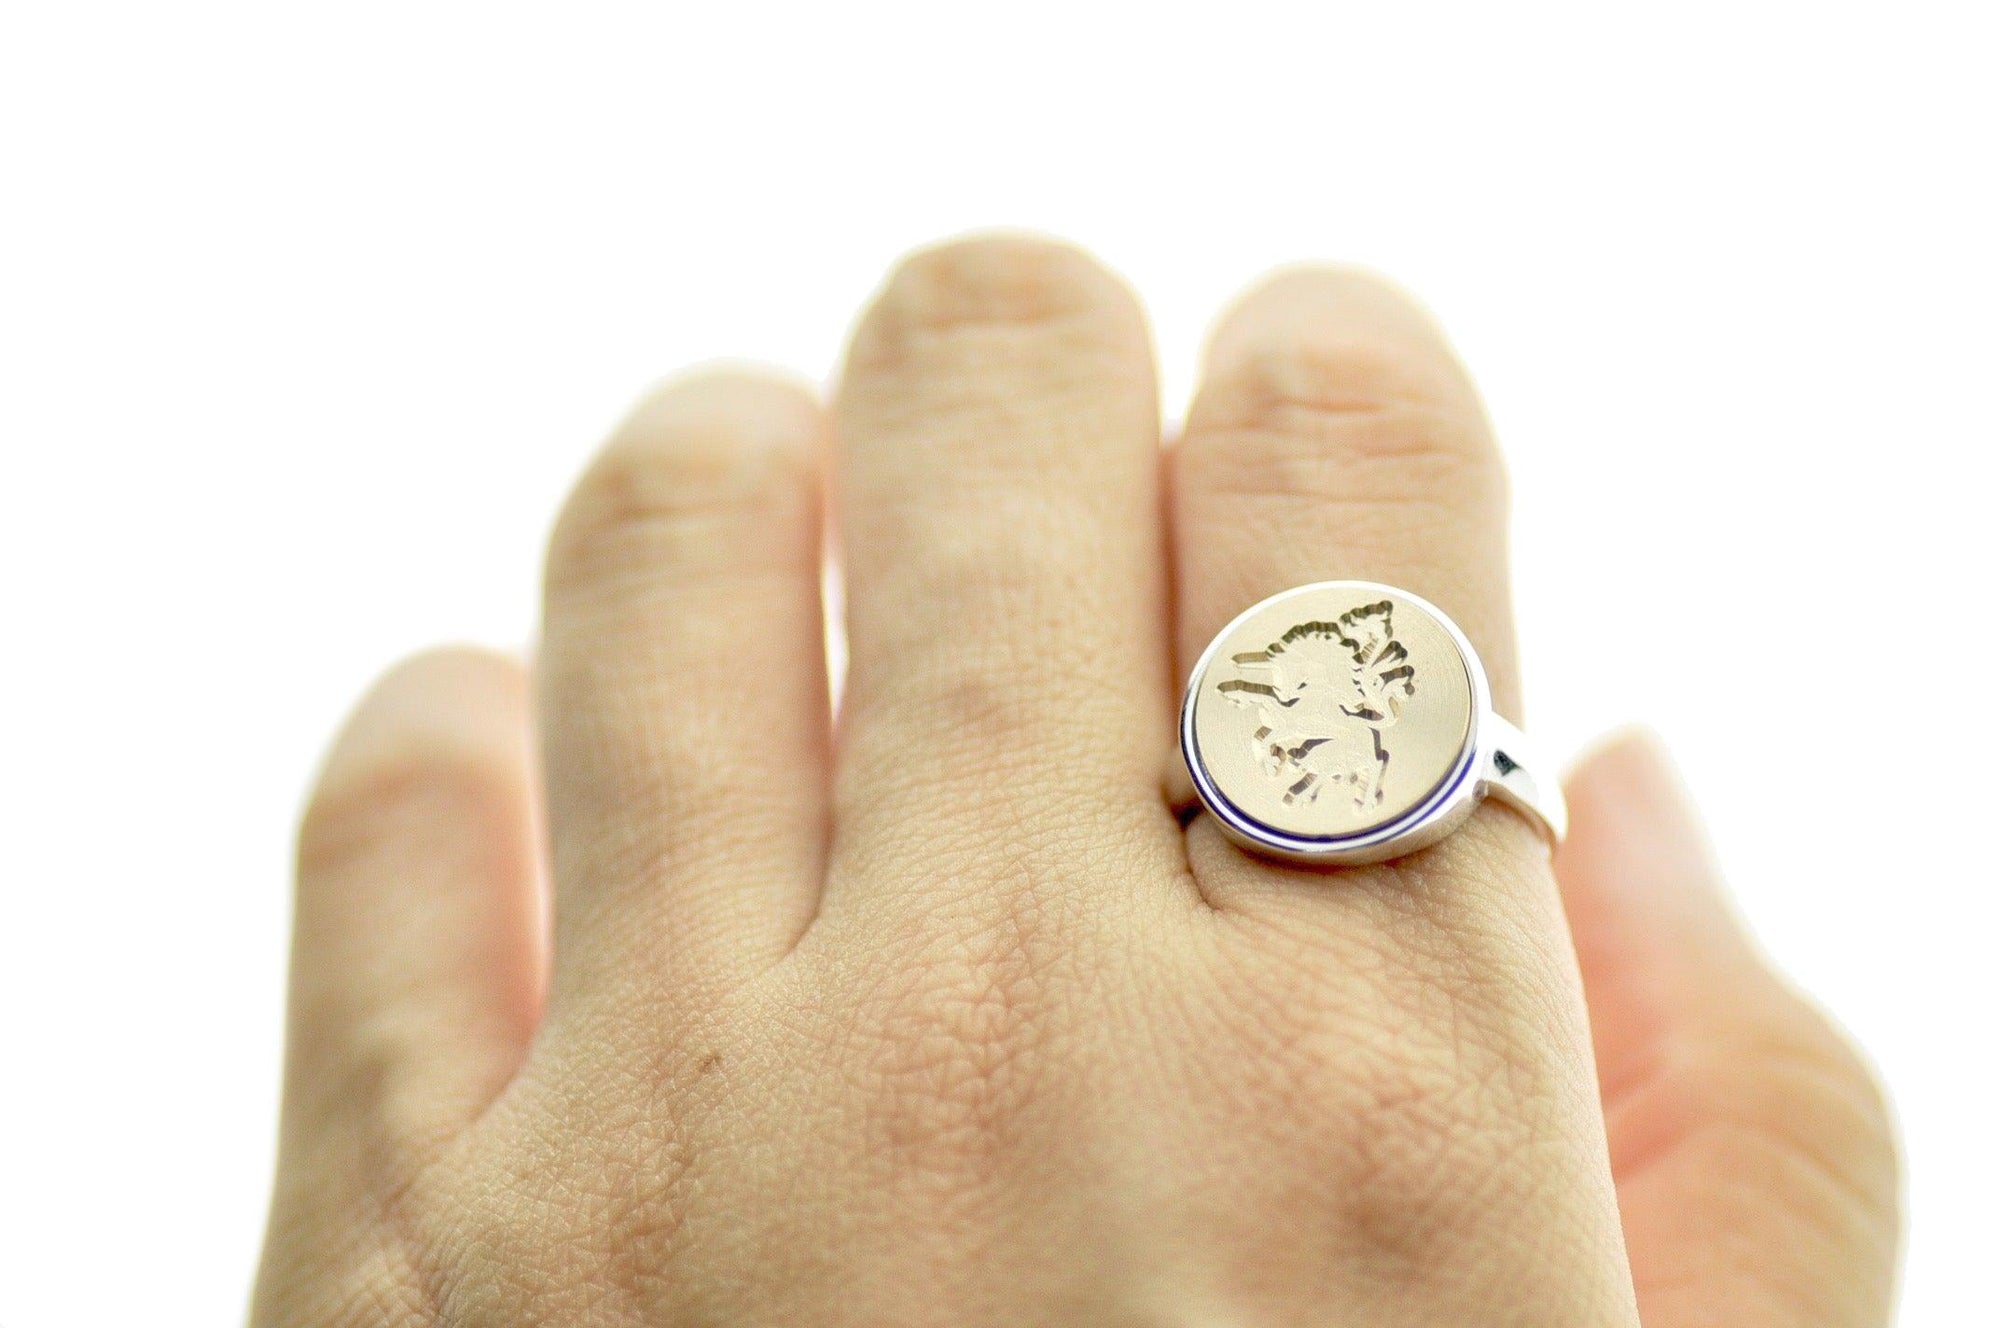 Unicorn Signet Ring - Backtozero B20 - 14m, 14mm, 14mm ring, 14mn, accessory, her, jewelry, minimal, Mythical Creatures, ring, signet ring, simple, size 10, size 7, size 8, size 9, unicorn, wax seal, wax seal stamp